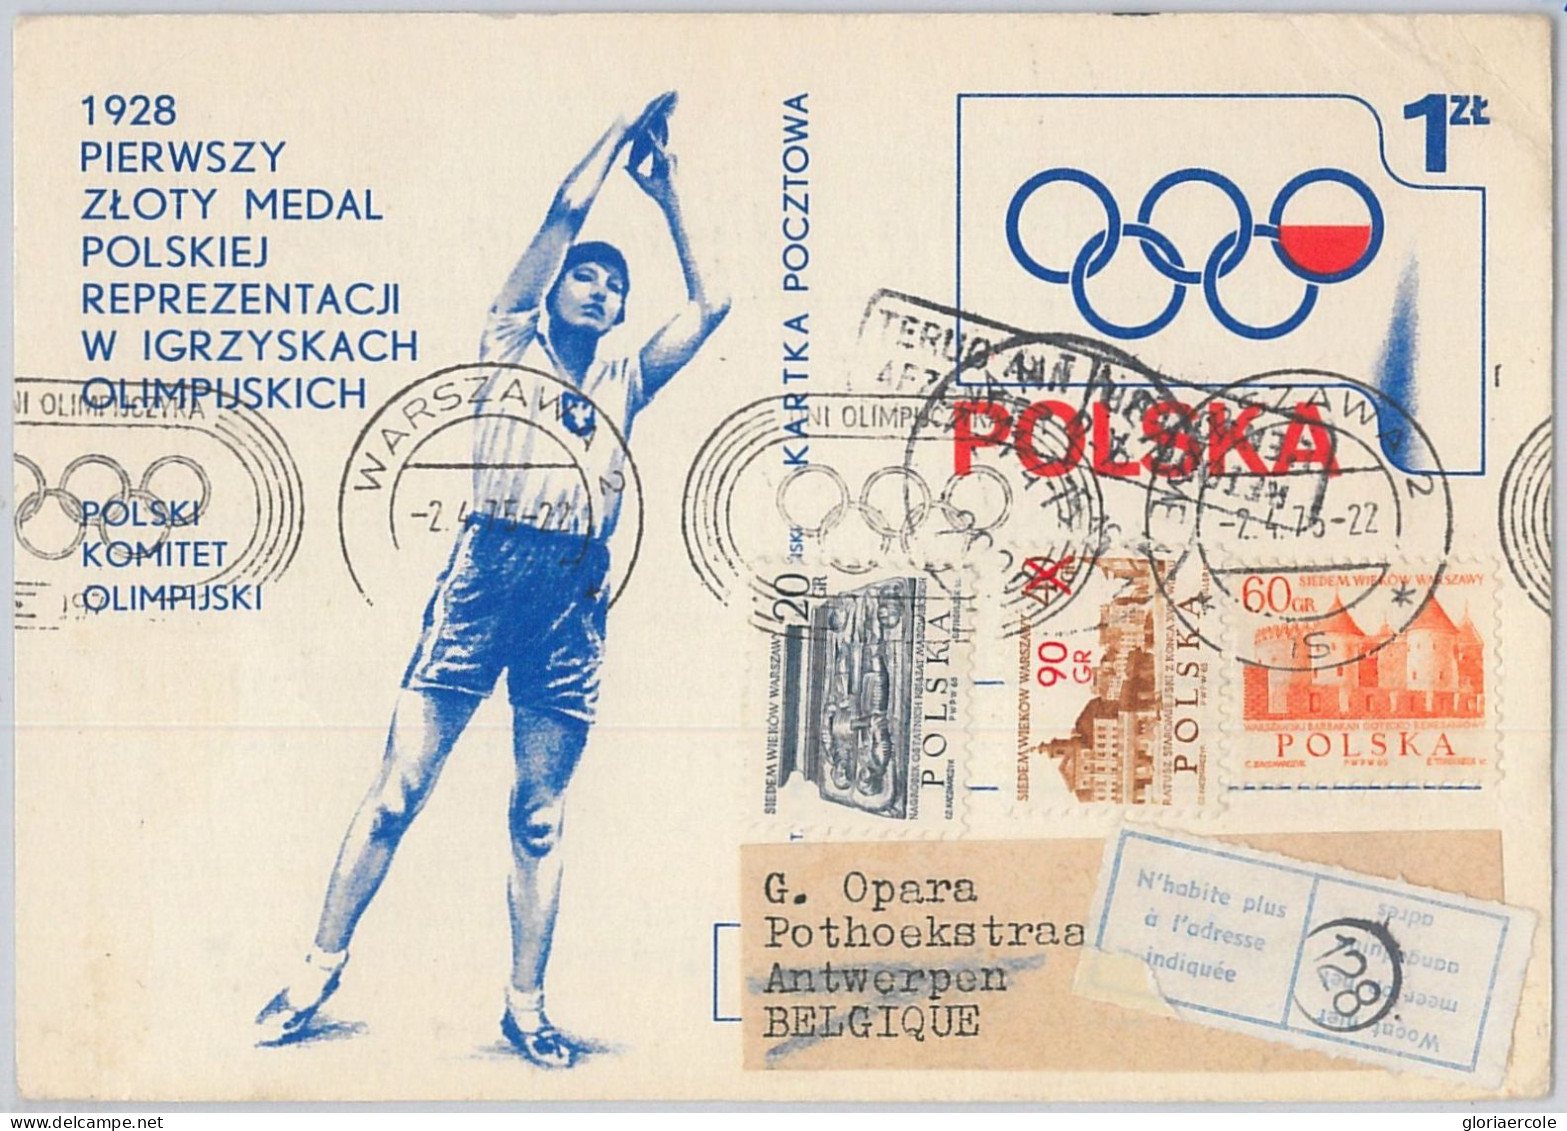 51131 - POLAND - POSTAL HISTORY -  STATIONERY 1978 OLYMPIC Games Disk Throwing - Zomer 1928: Amsterdam